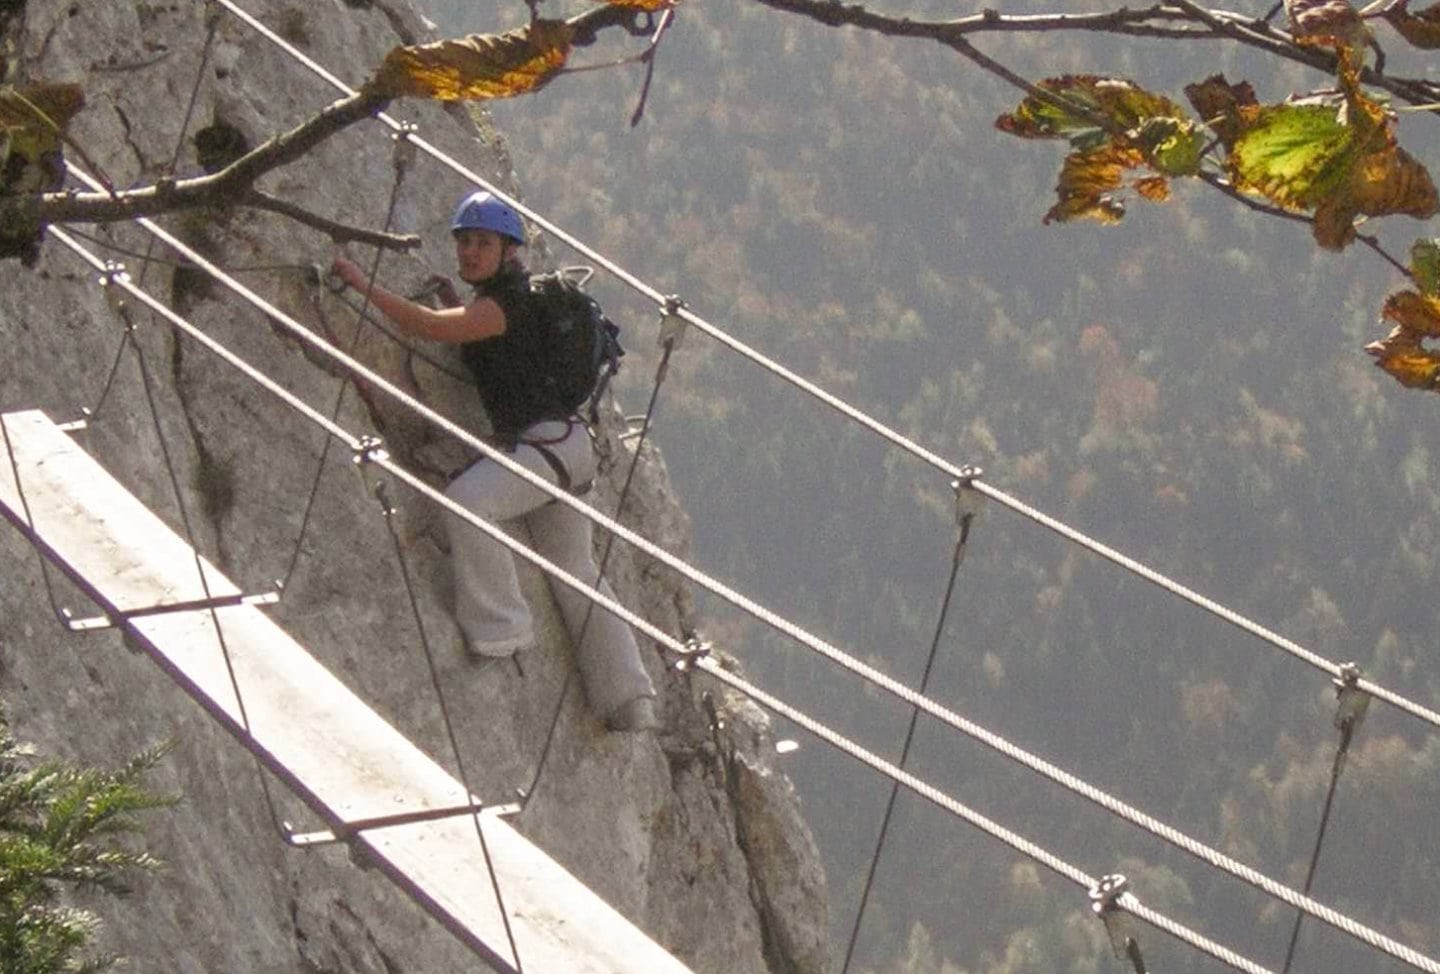 Girl rock climbing via ferrata style, attached to a steel cable by equipment.